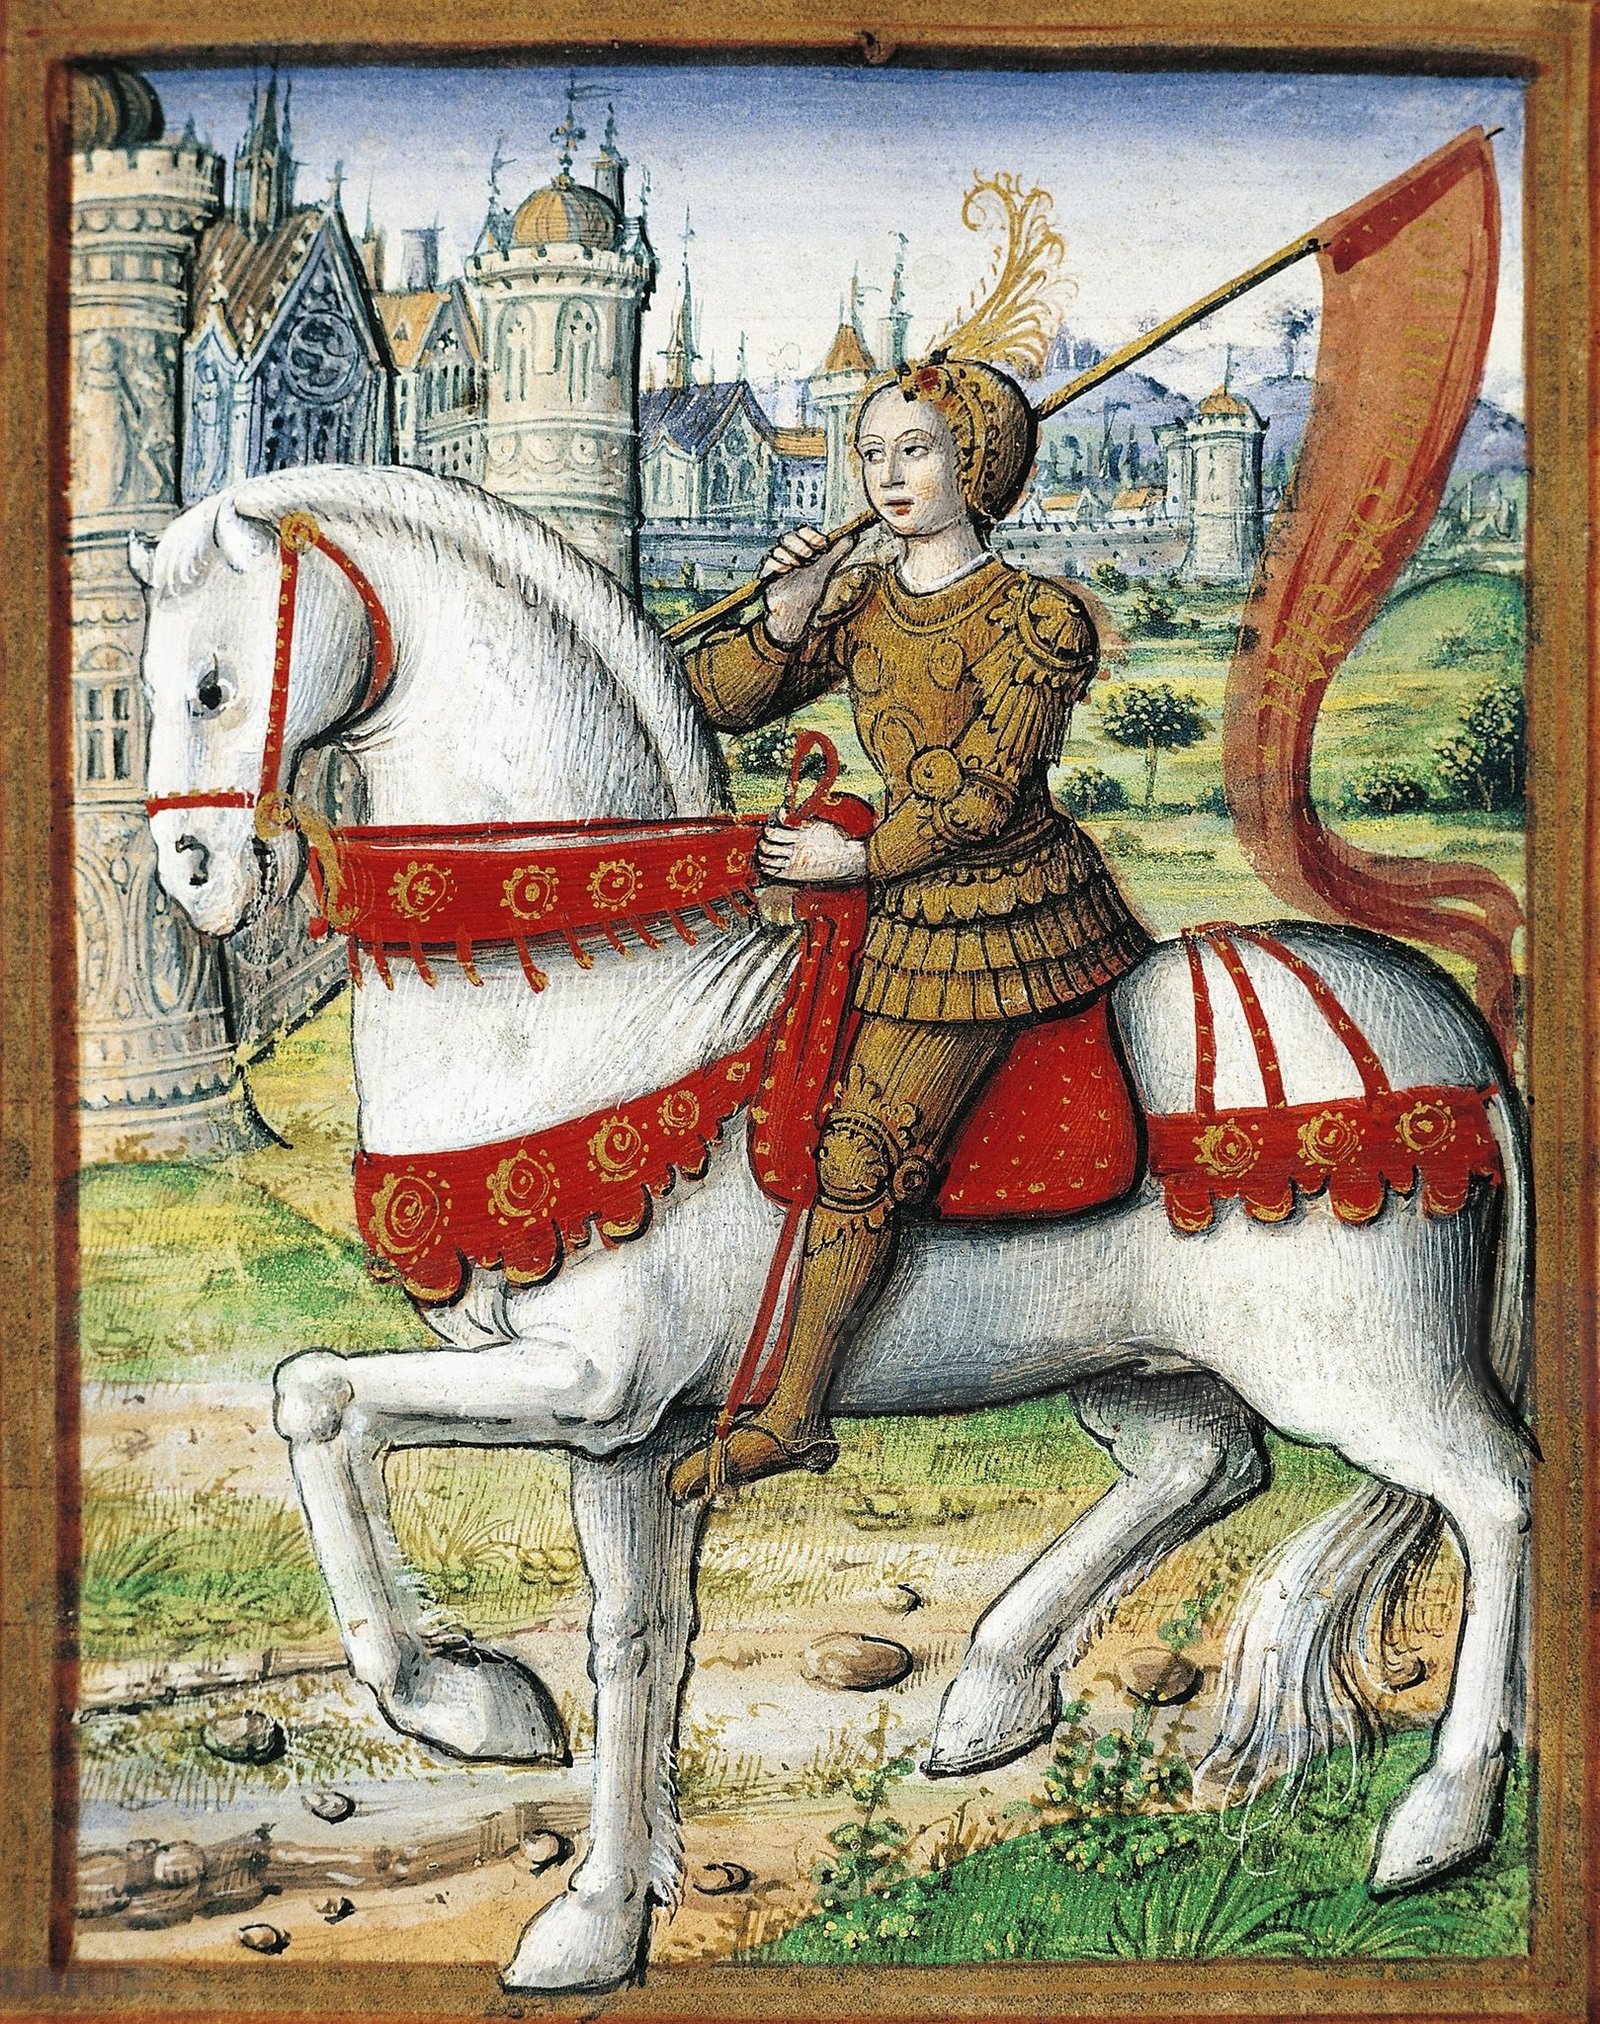 Jeanne d'Arc armed and riding her white charger